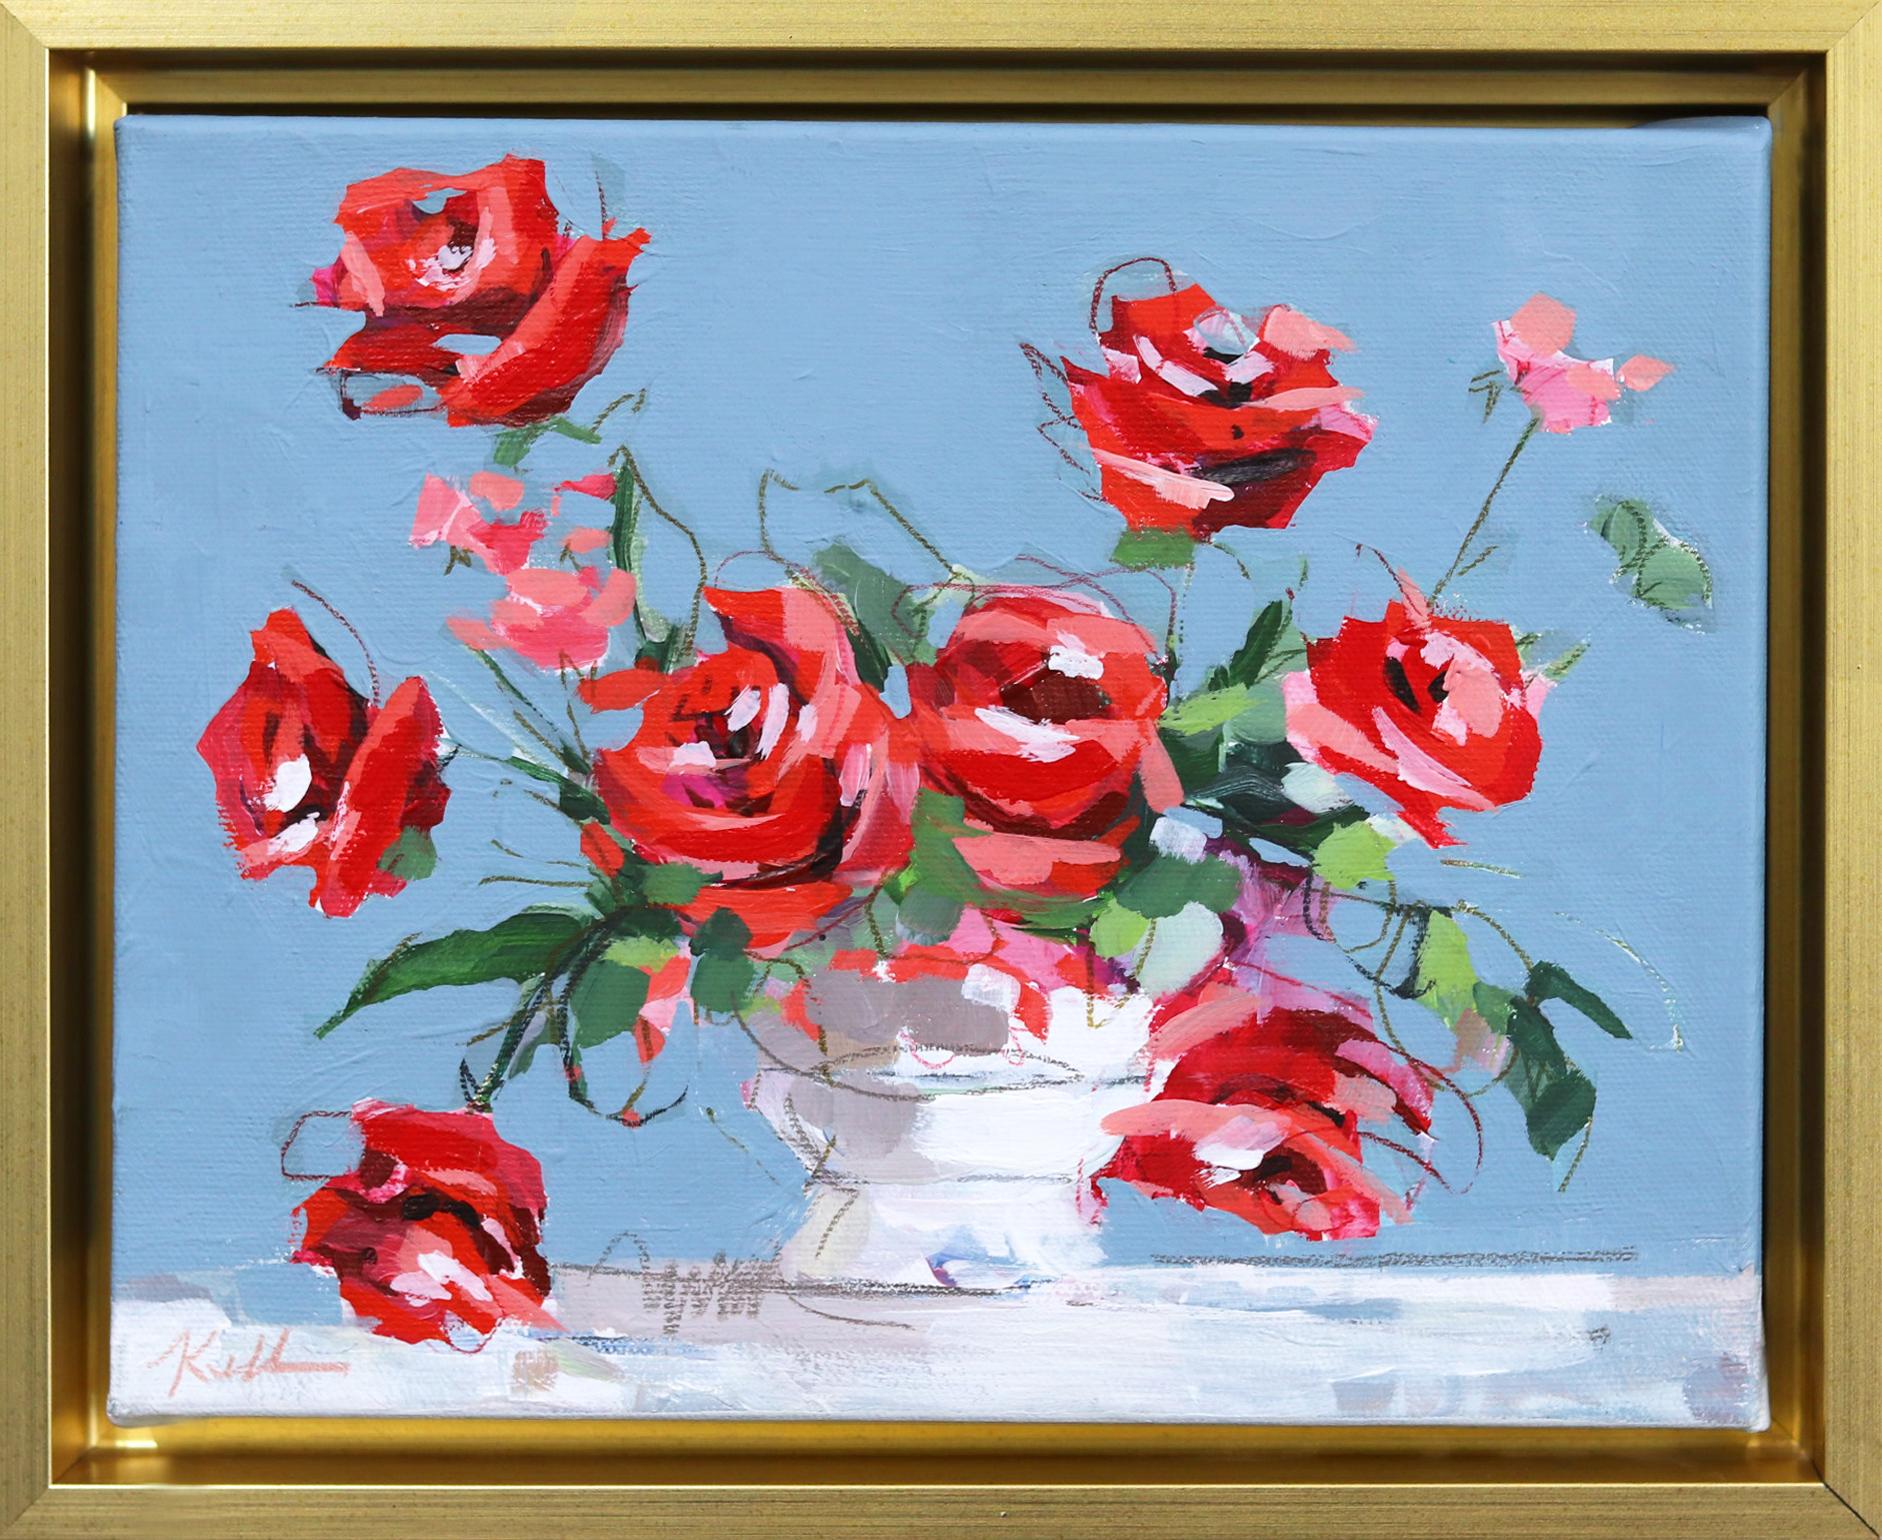 Kellie Newsome Figurative Painting - Ruby Red Kisses  - Original Framed Floral Painting on Canvas